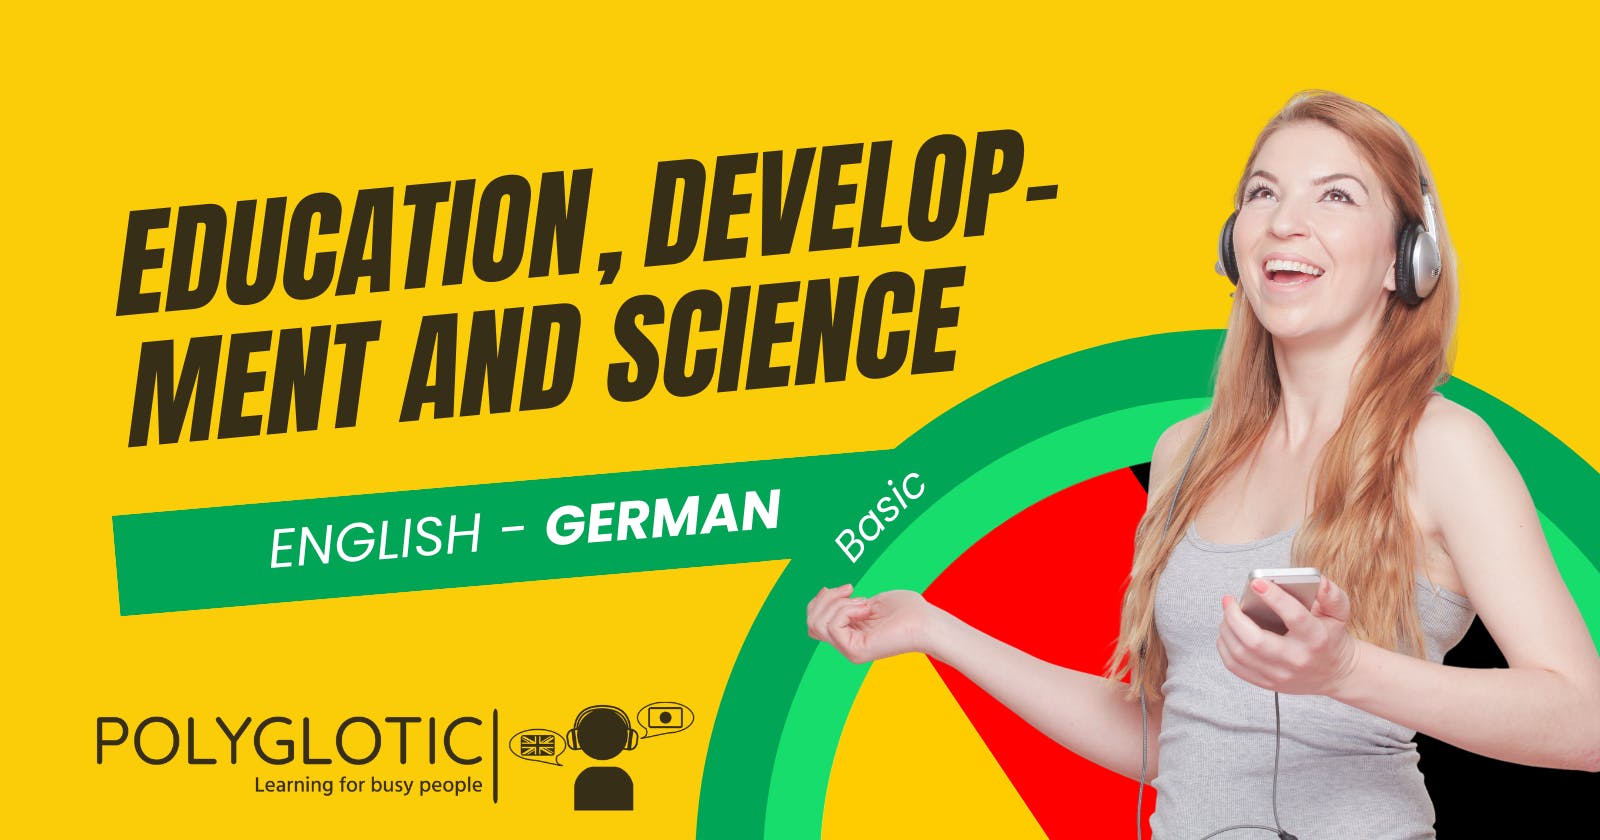 🇩🇪 Learn German for Academic Purposes: Basic Words for Education and Science